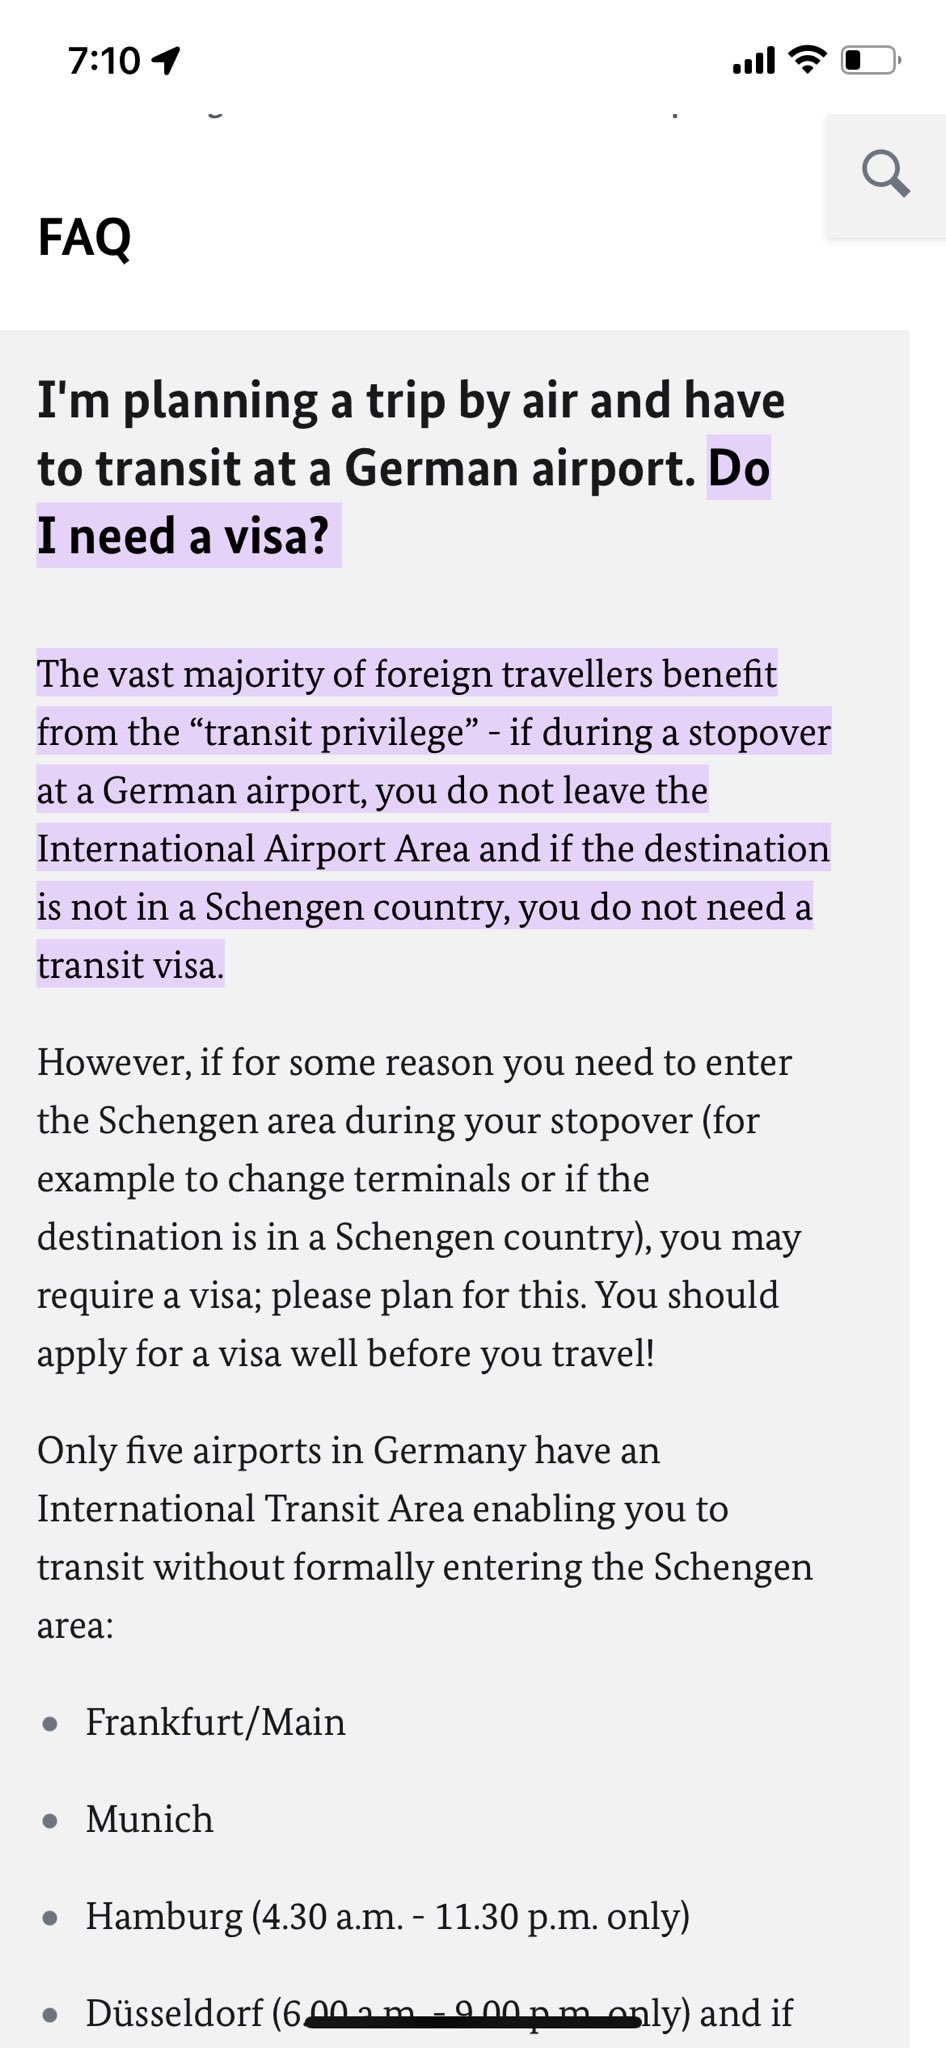 Petlee Peter on Twitter: "Indian passport holders denied boarding at  Bengaluru Airport over no transit visa to fly through Frankfurt and other  European transit points. In a latest student heading to London